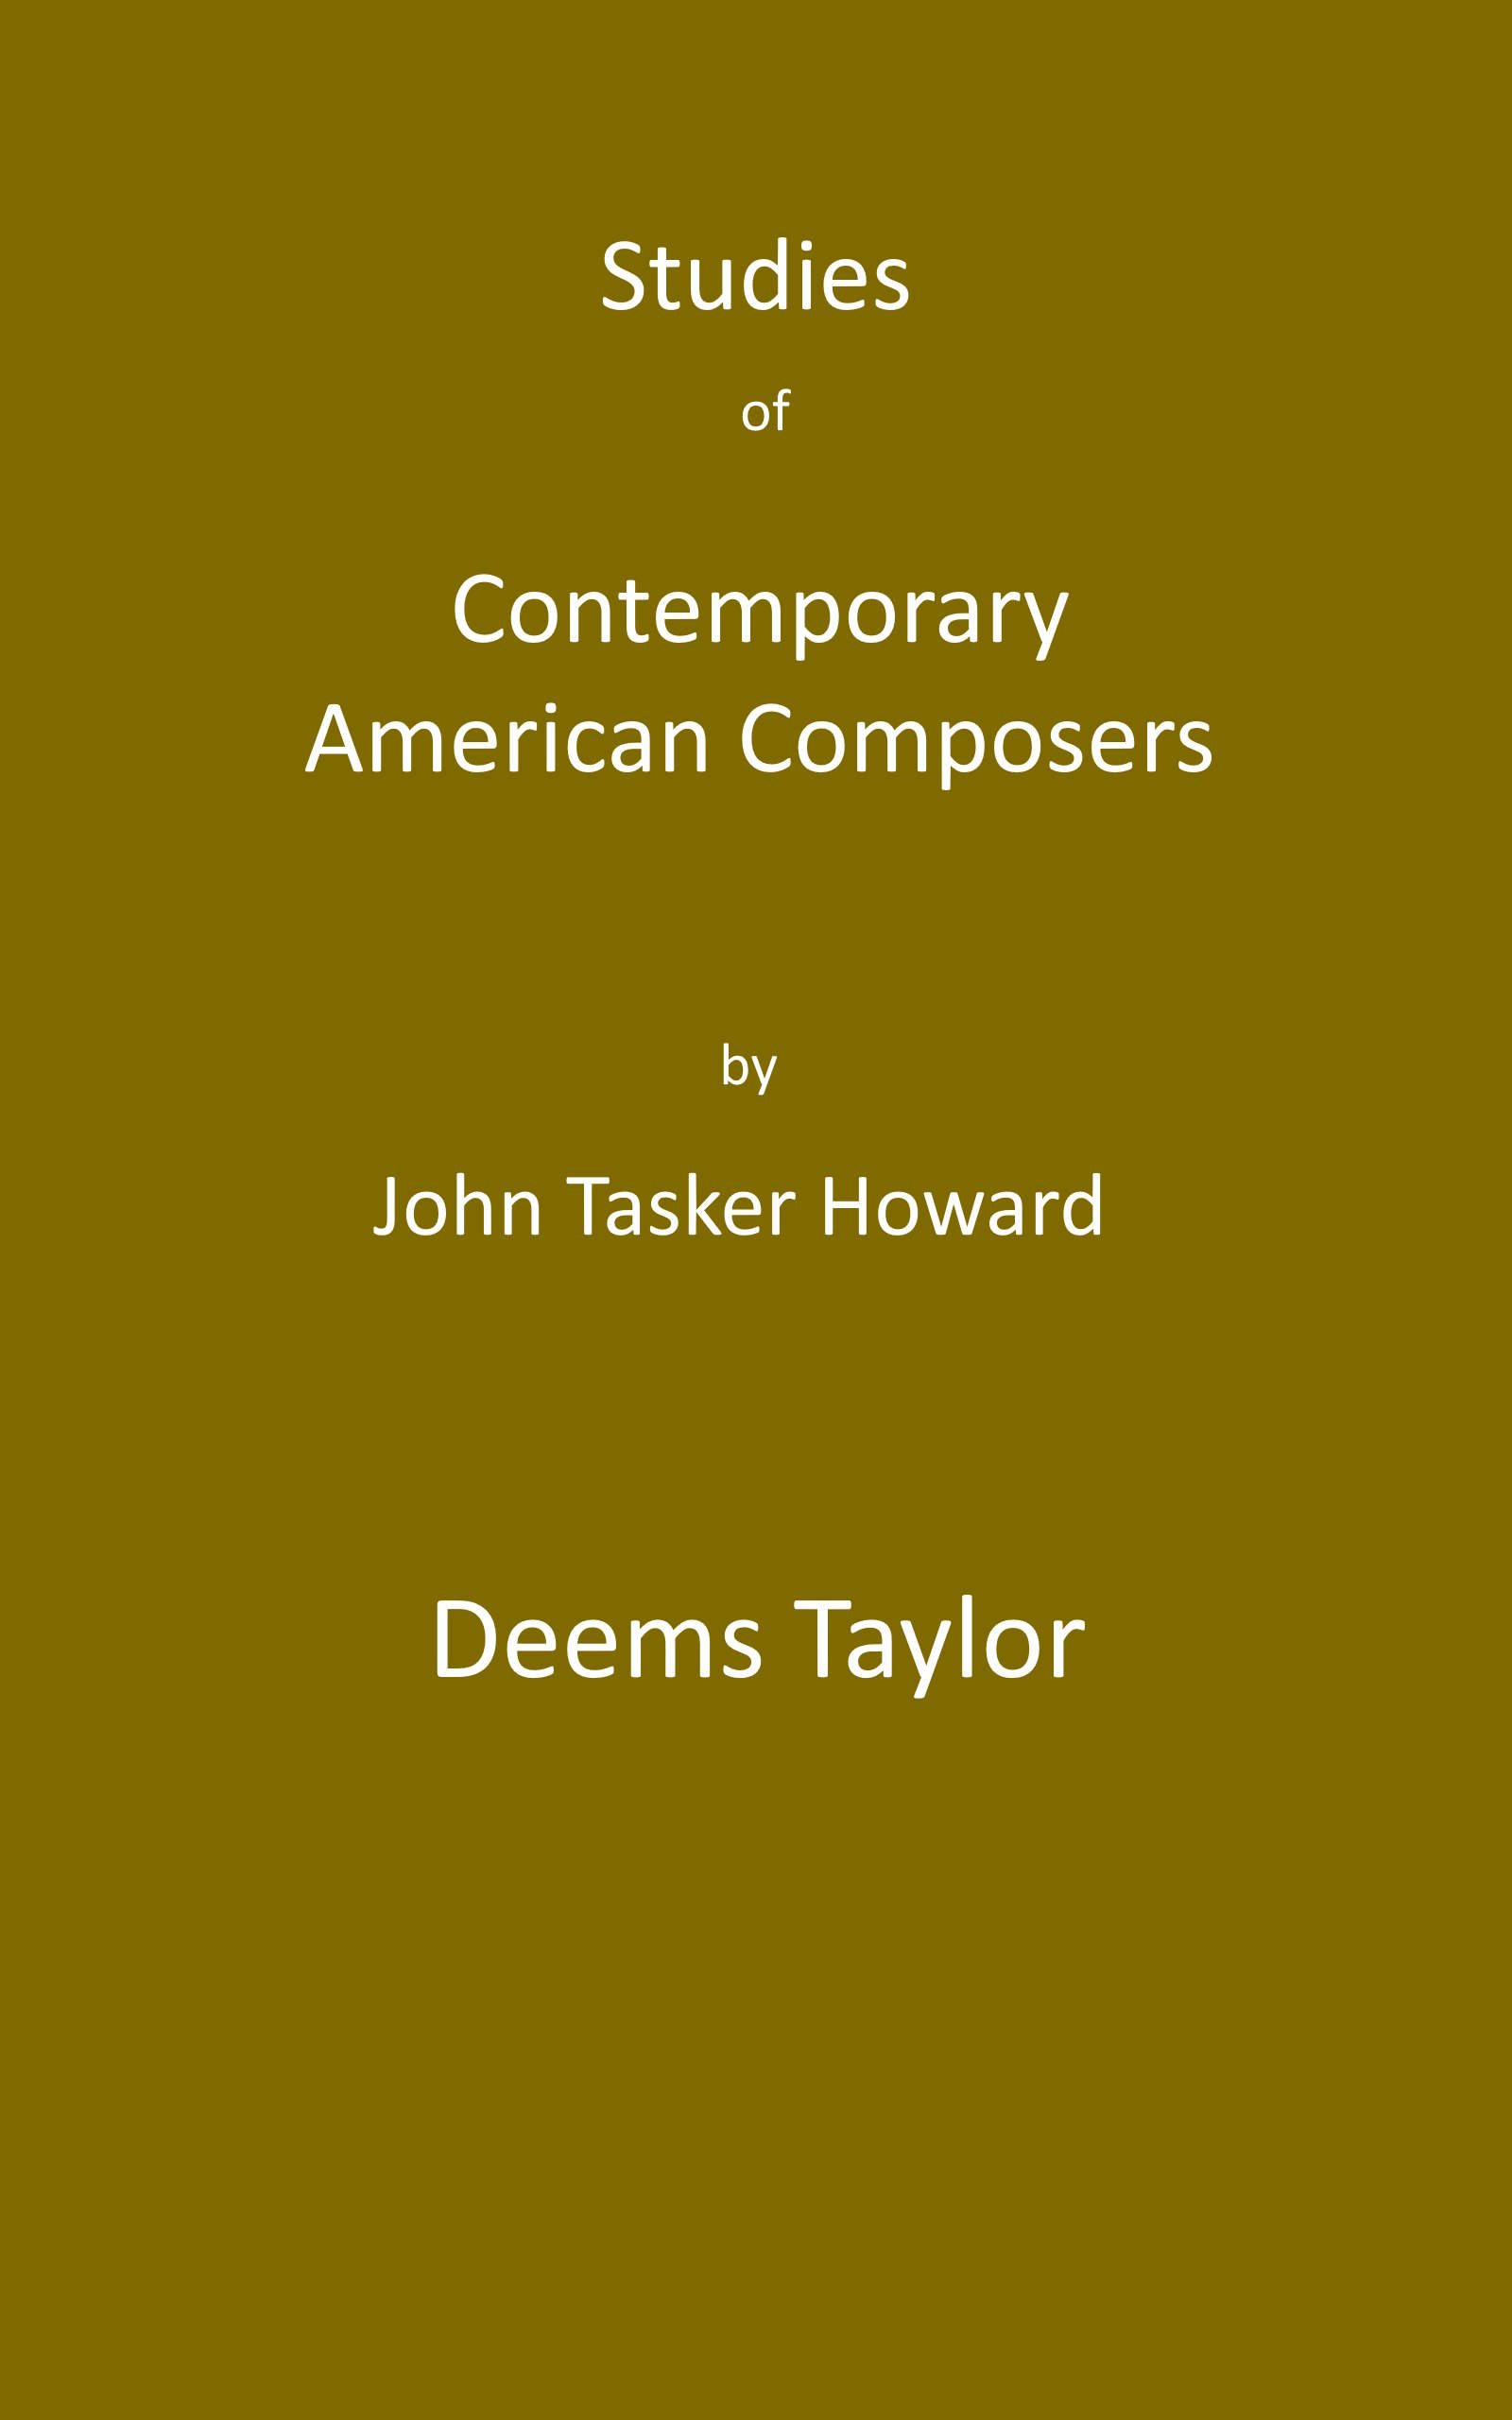 Studies of Contemporary American Composers: Deems Taylor | Project ...